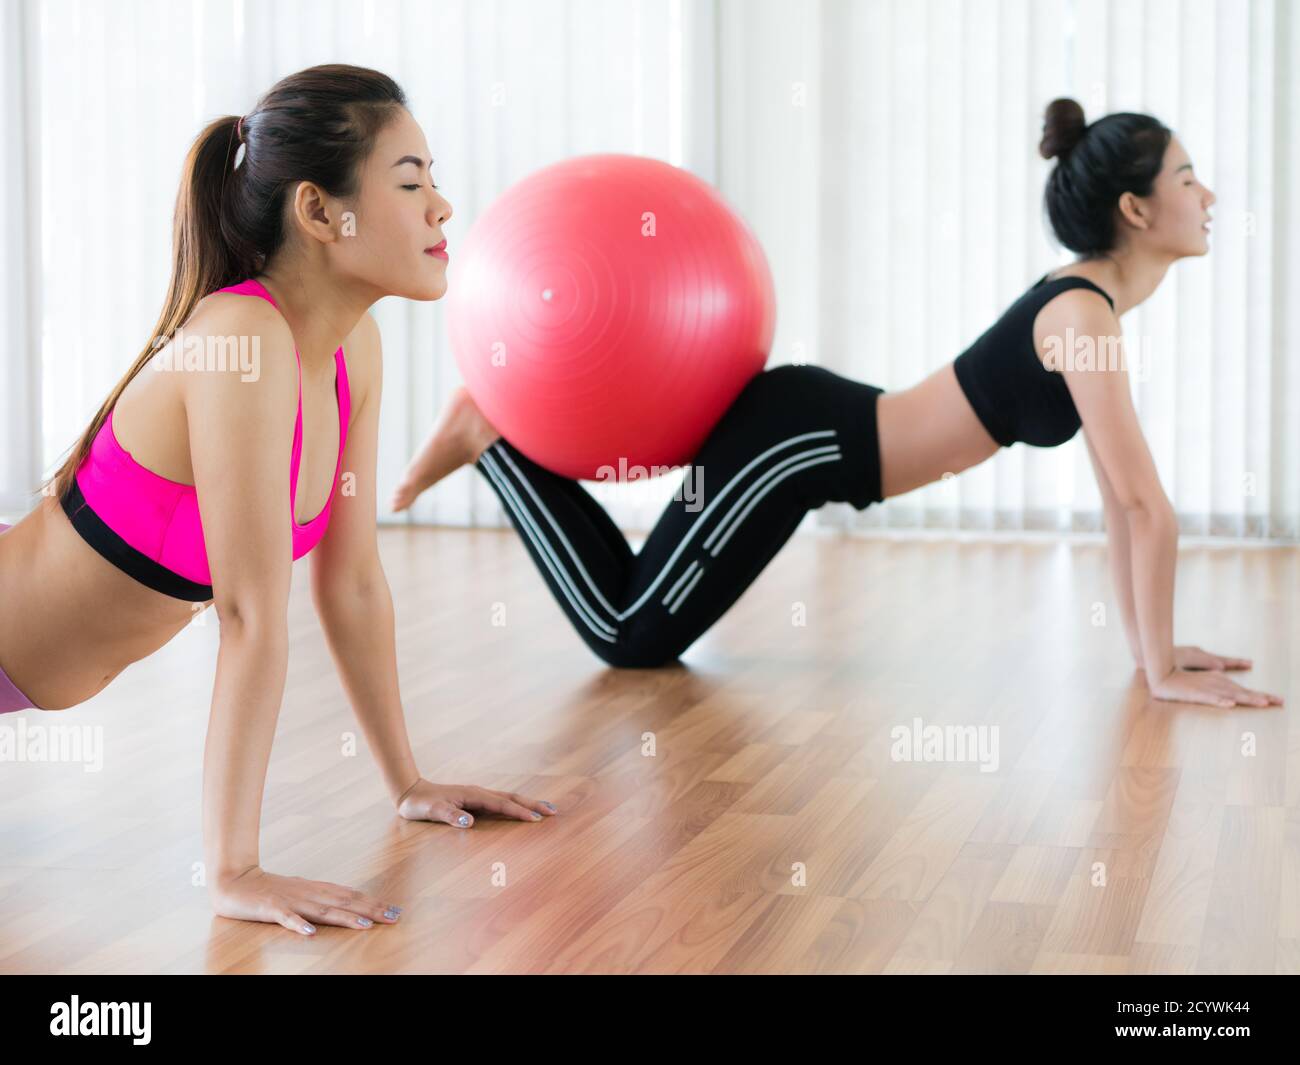 Women doing exercise with fit ball in gym group or yoga class. Healthy lifestyle concept. Stock Photo